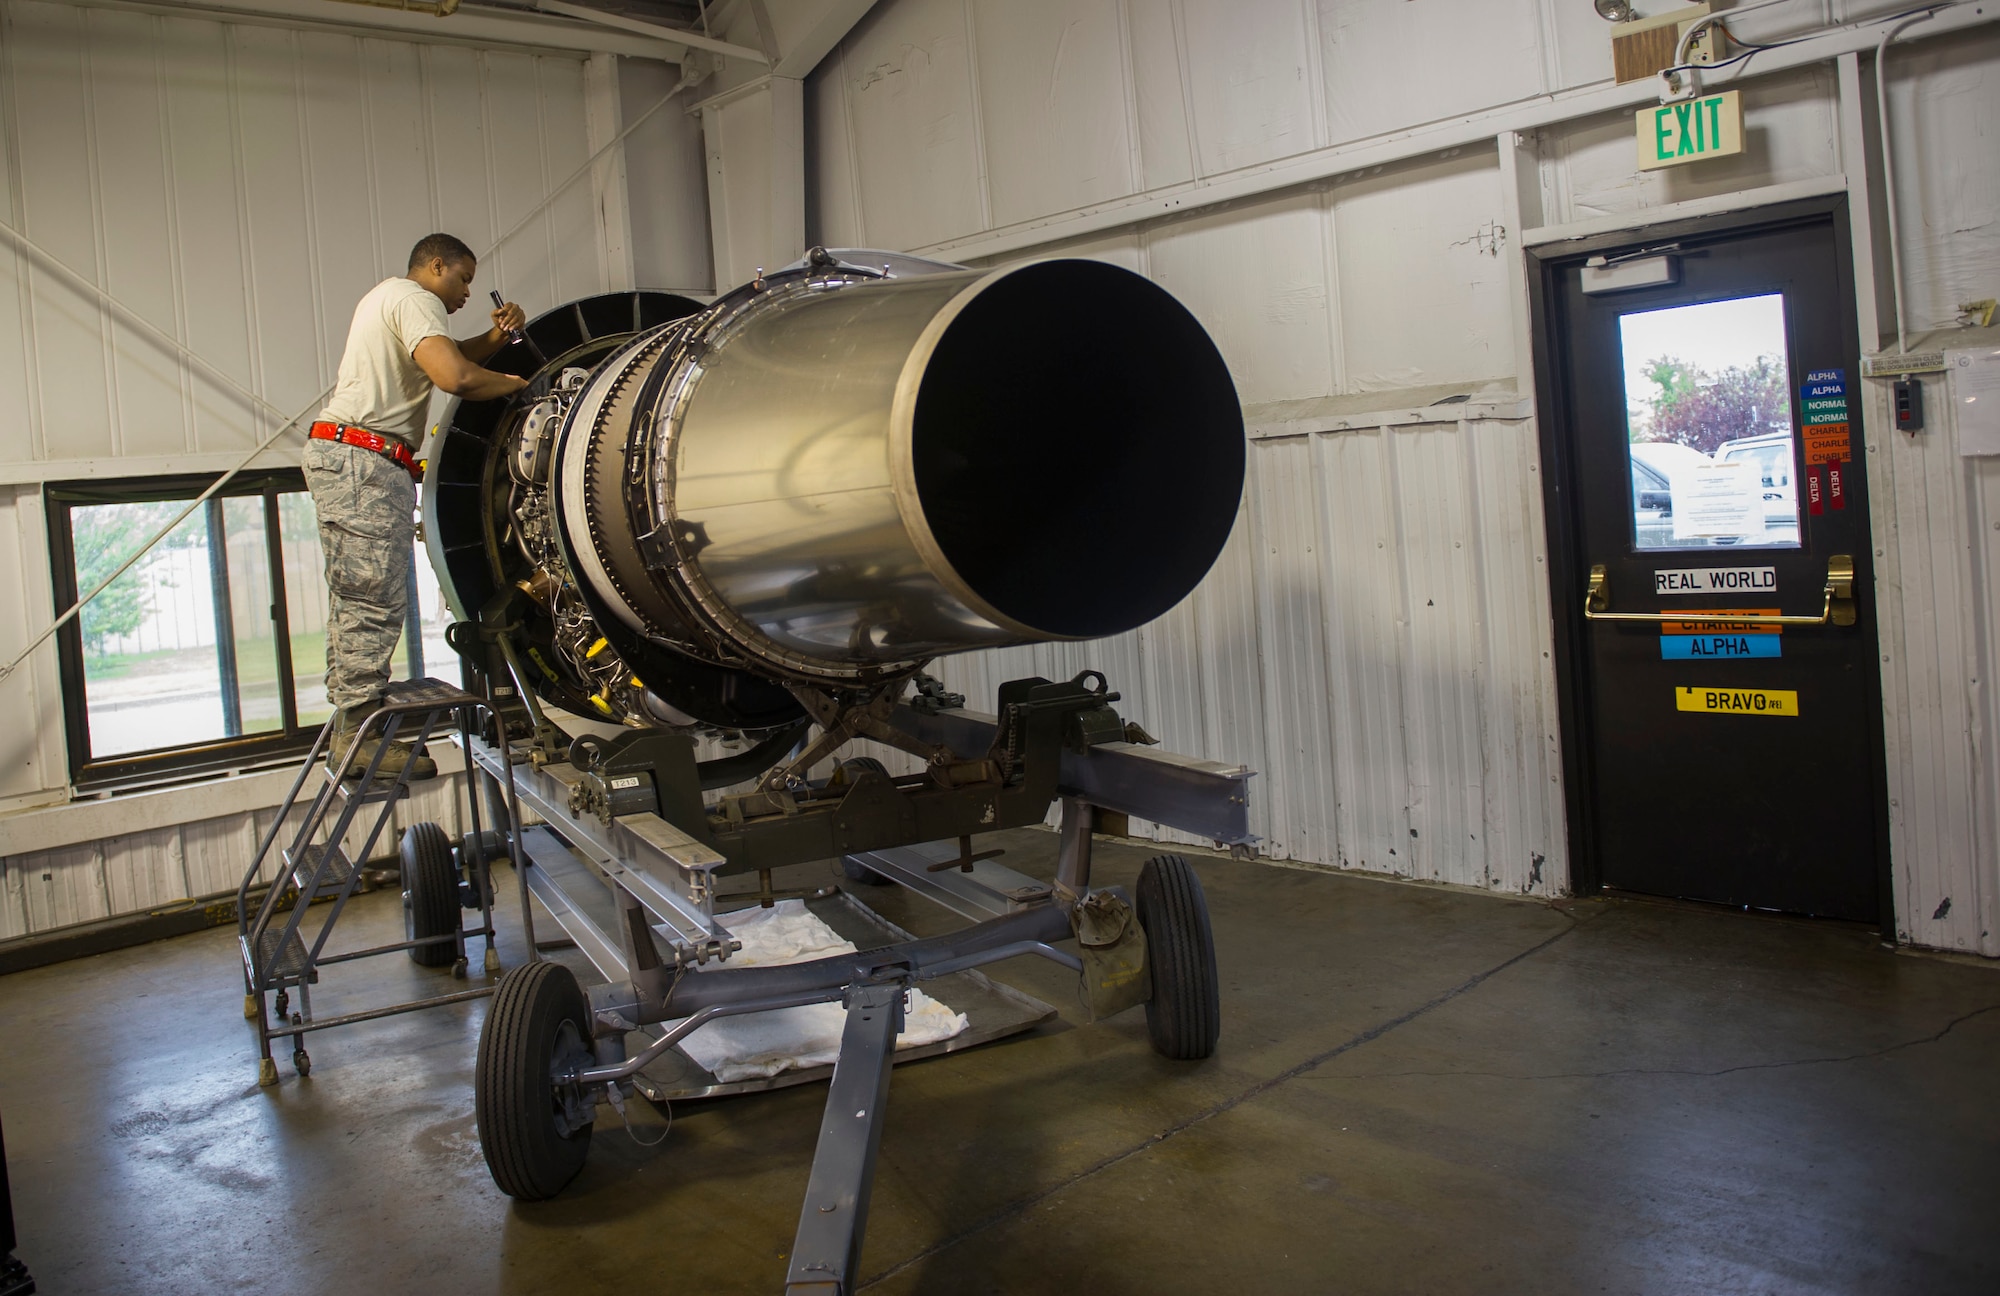 Staff Sgt. Korie Parker, 5th Maintenance Group engine trending and diagnostic monitor, inspects a B-52 combine engine at Minot Air Force Base, N.D., July 5, 2016. The engine management shop is the focal point for maintaining and distributing the combine engines. (U.S. Air Force photo/Senior Airman Apryl Hall)